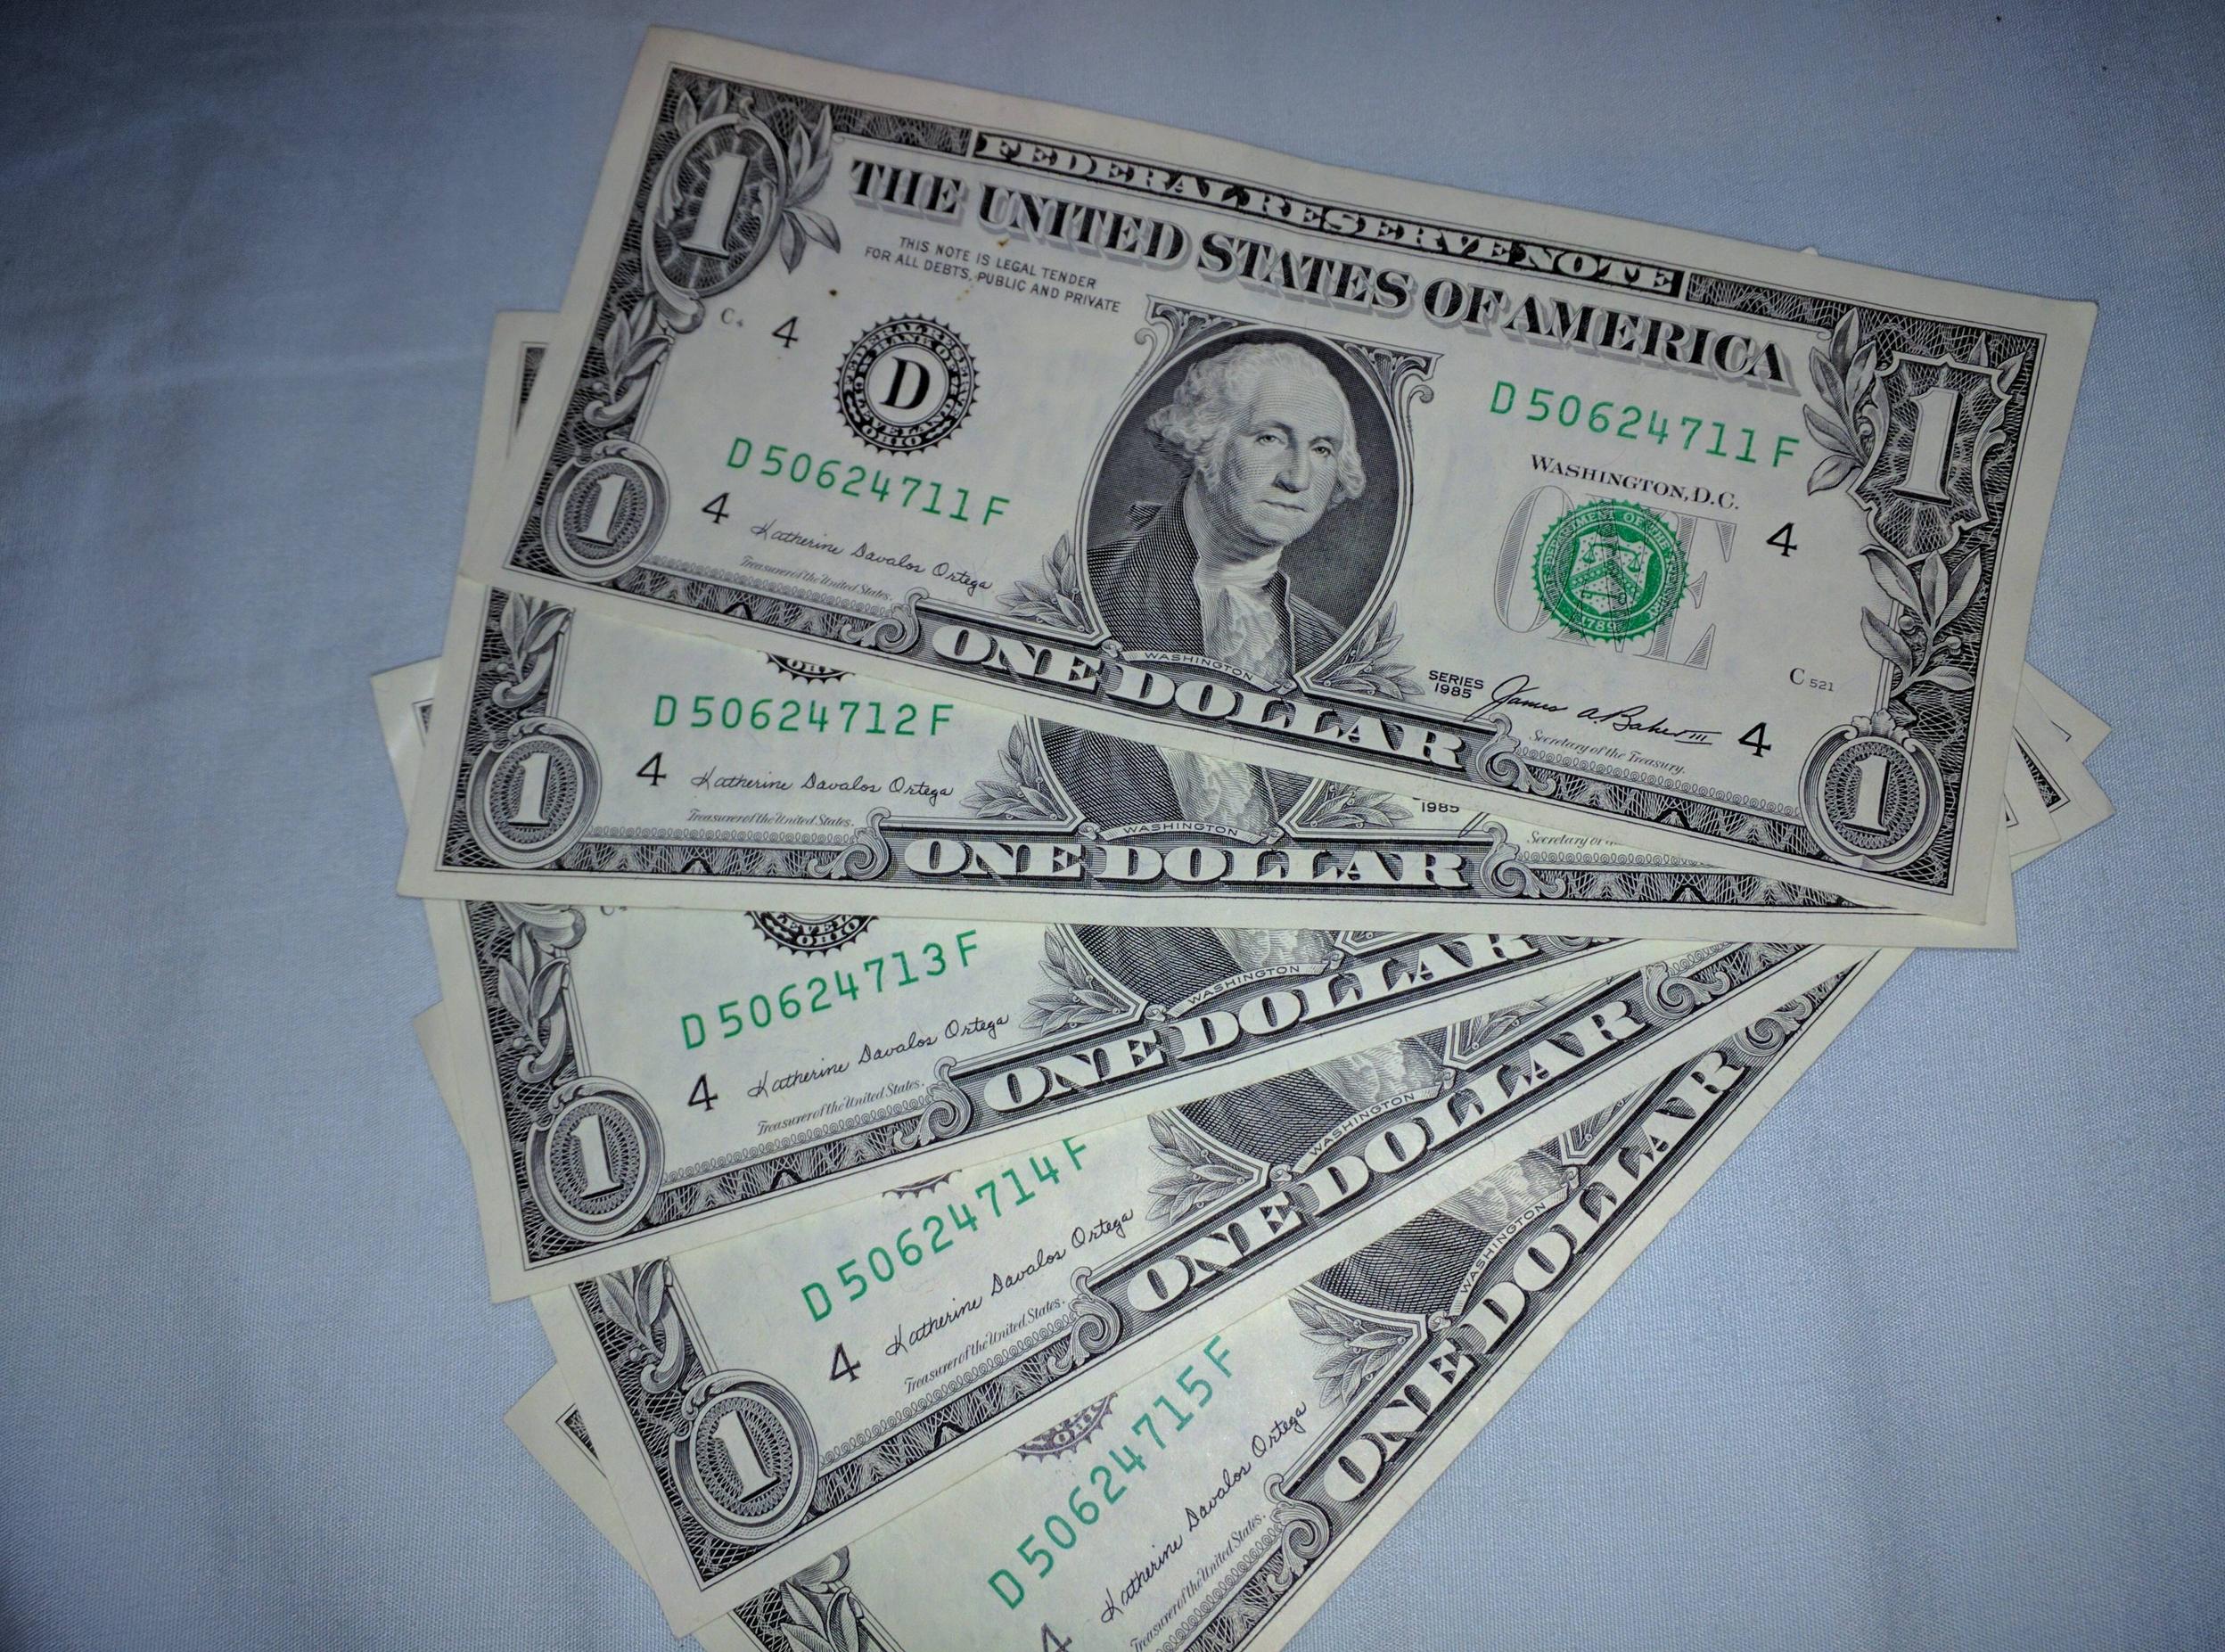 Tonight I was tipped with 5 crisp sequential one dollar bills from ...